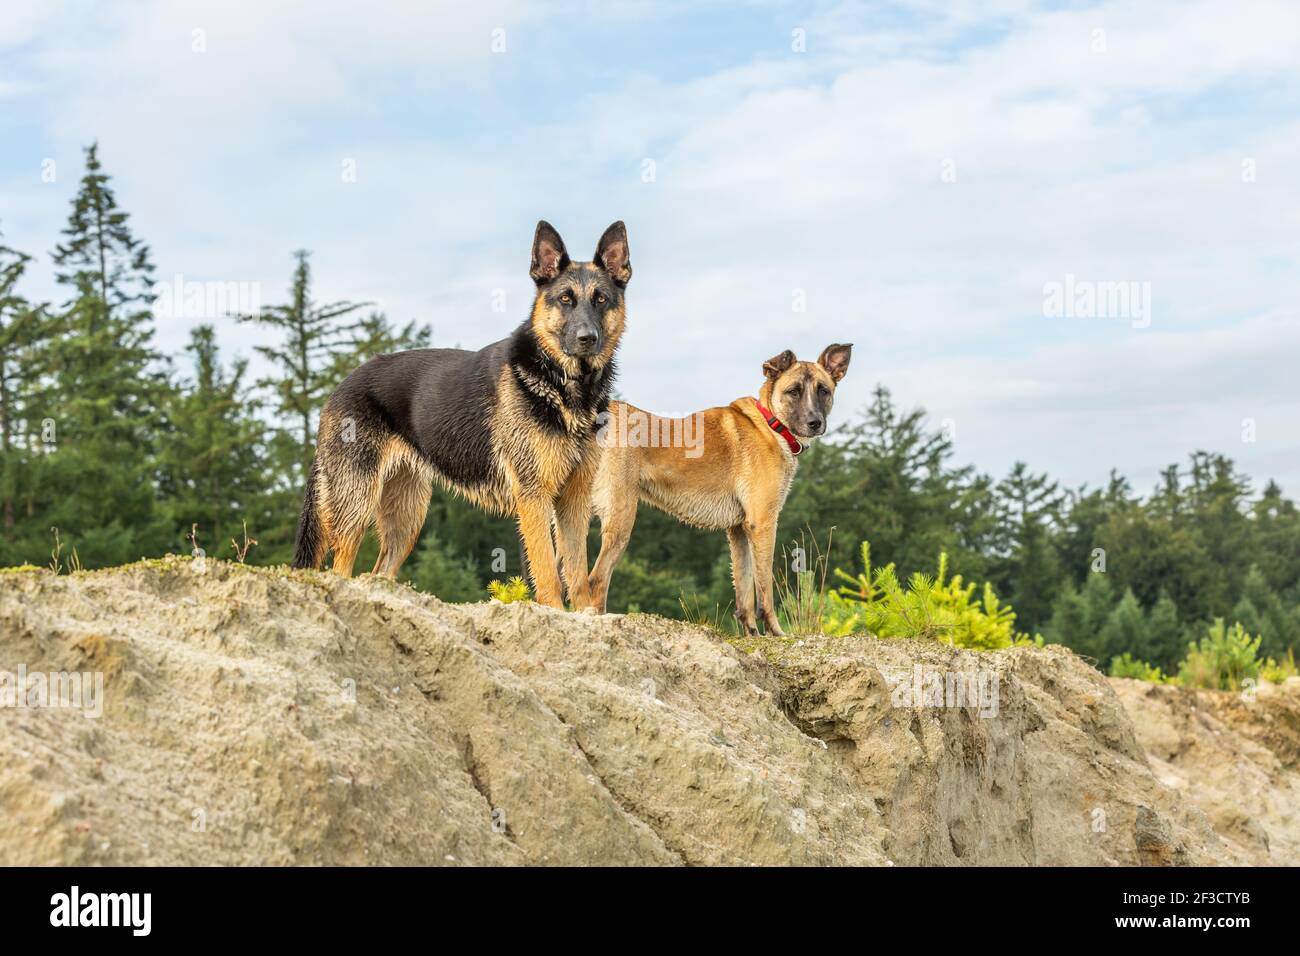 A beautiful German Shepherd and a Malinois are on a sand dune and looks down to the photographer with beautiful upright ears and a fierce glance Stock Photo